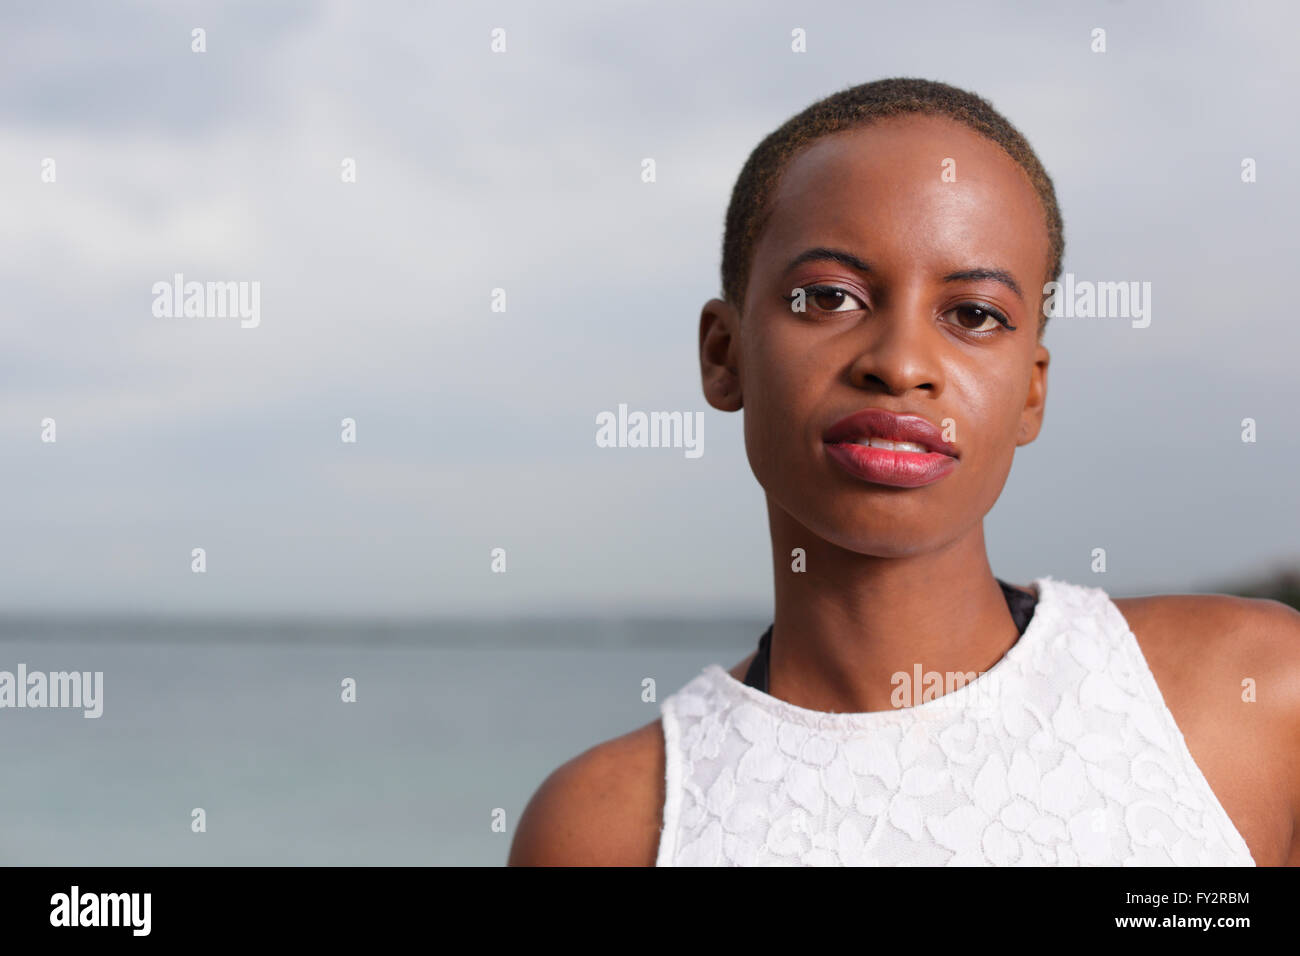 Woman with a bald head Stock Photo